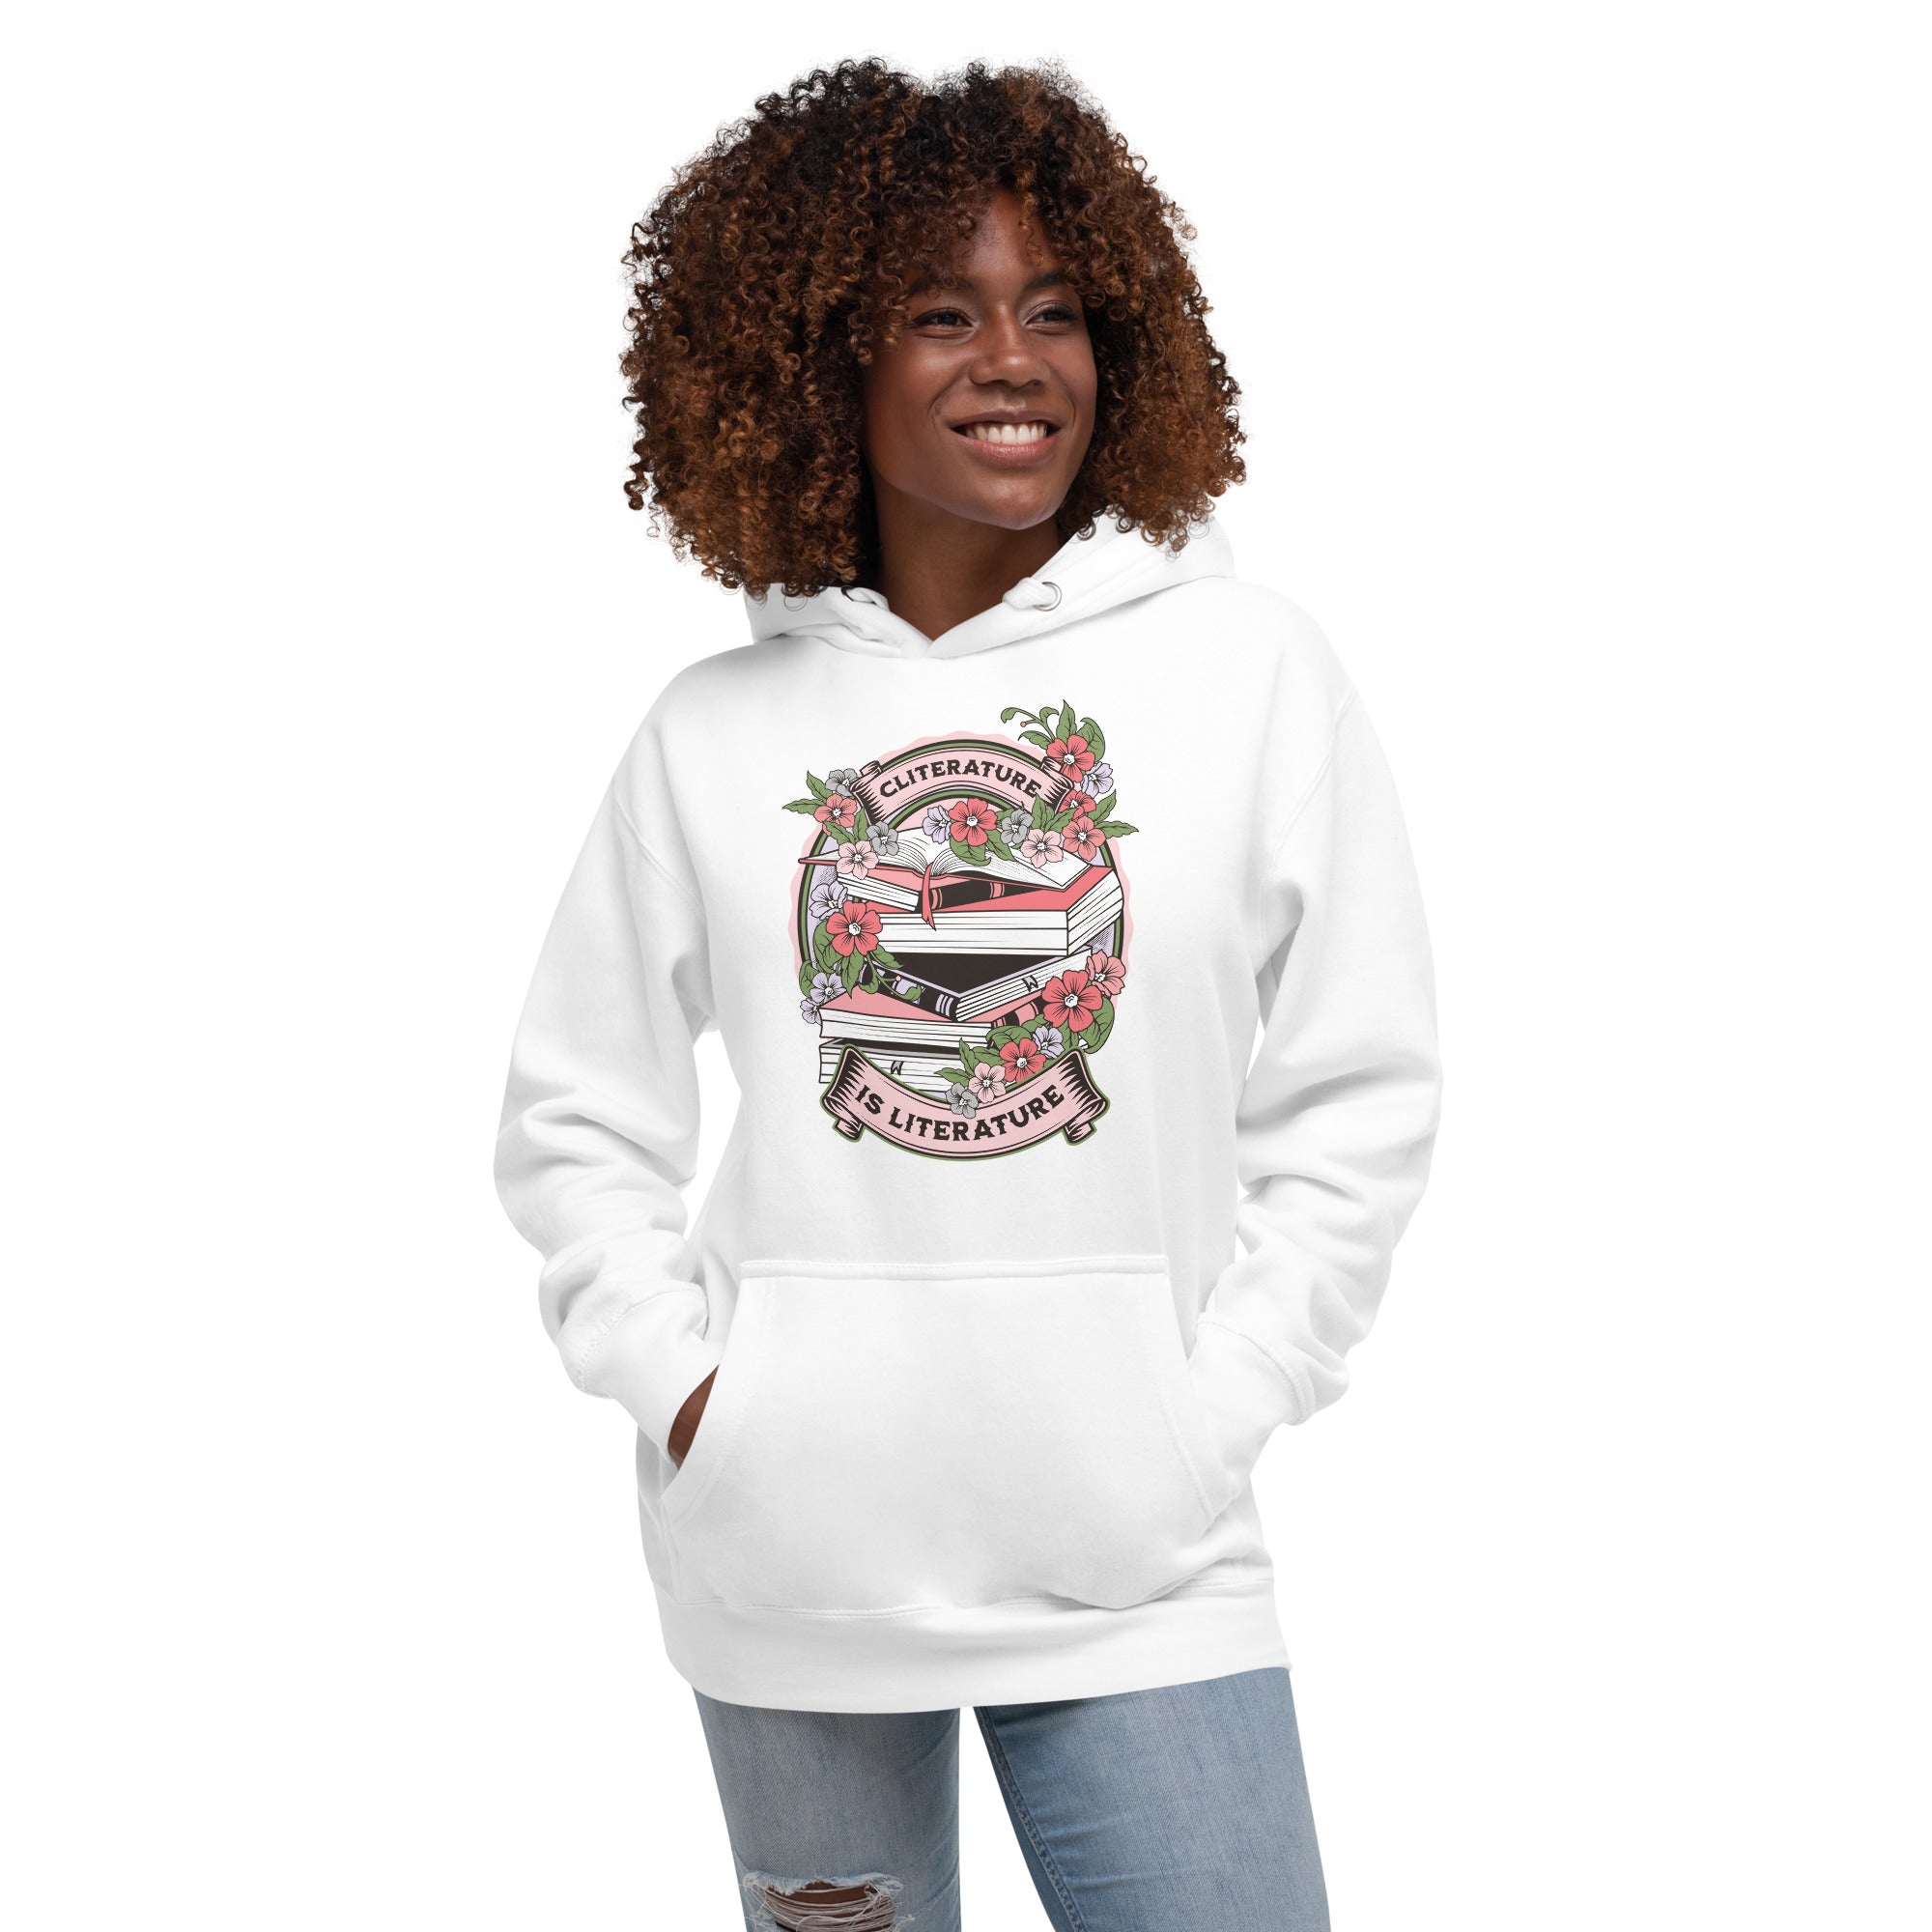 Cliterature is Literature Spring Bookstack Unisex Hoodie *NEW BRAND - CHECK SIZING*